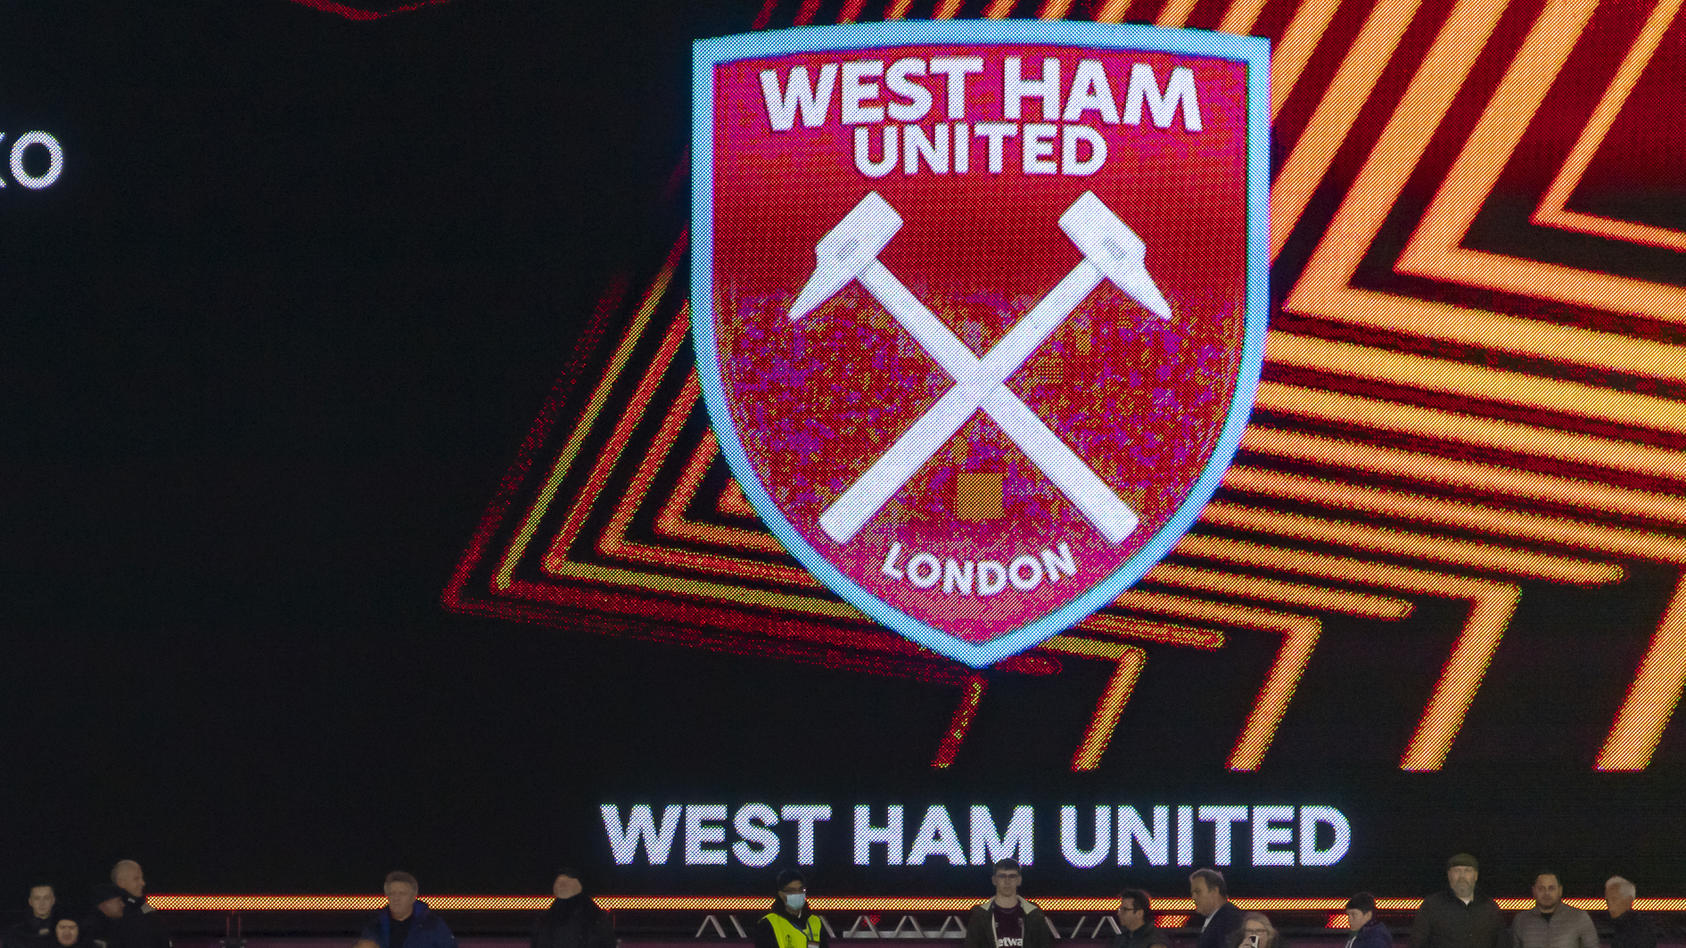 West Ham team is announced during the UEFA 2021 Europa League match between West Ham United and SK Rapid Wien, London Stadium, Group H, match 2. September 30th 2021, Credit:ANTHONY_STANLEY / Avalon